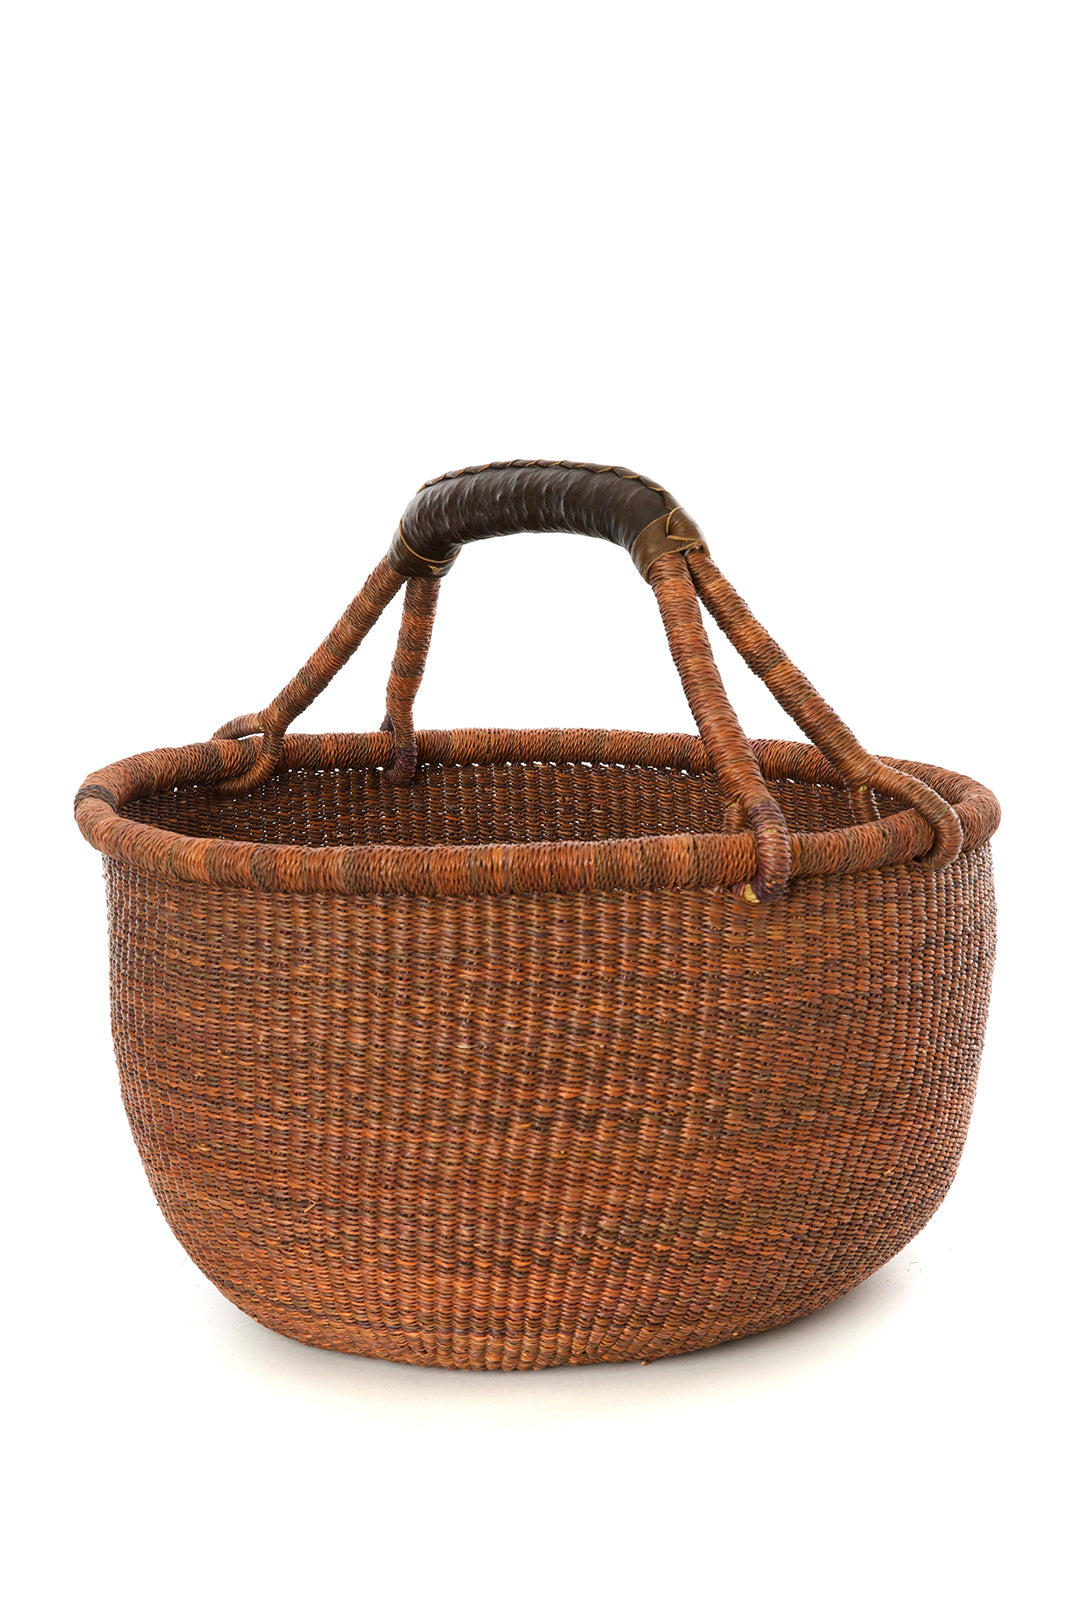 Cinnamon Stick Bolga Basket with Leather Wrapped Handles